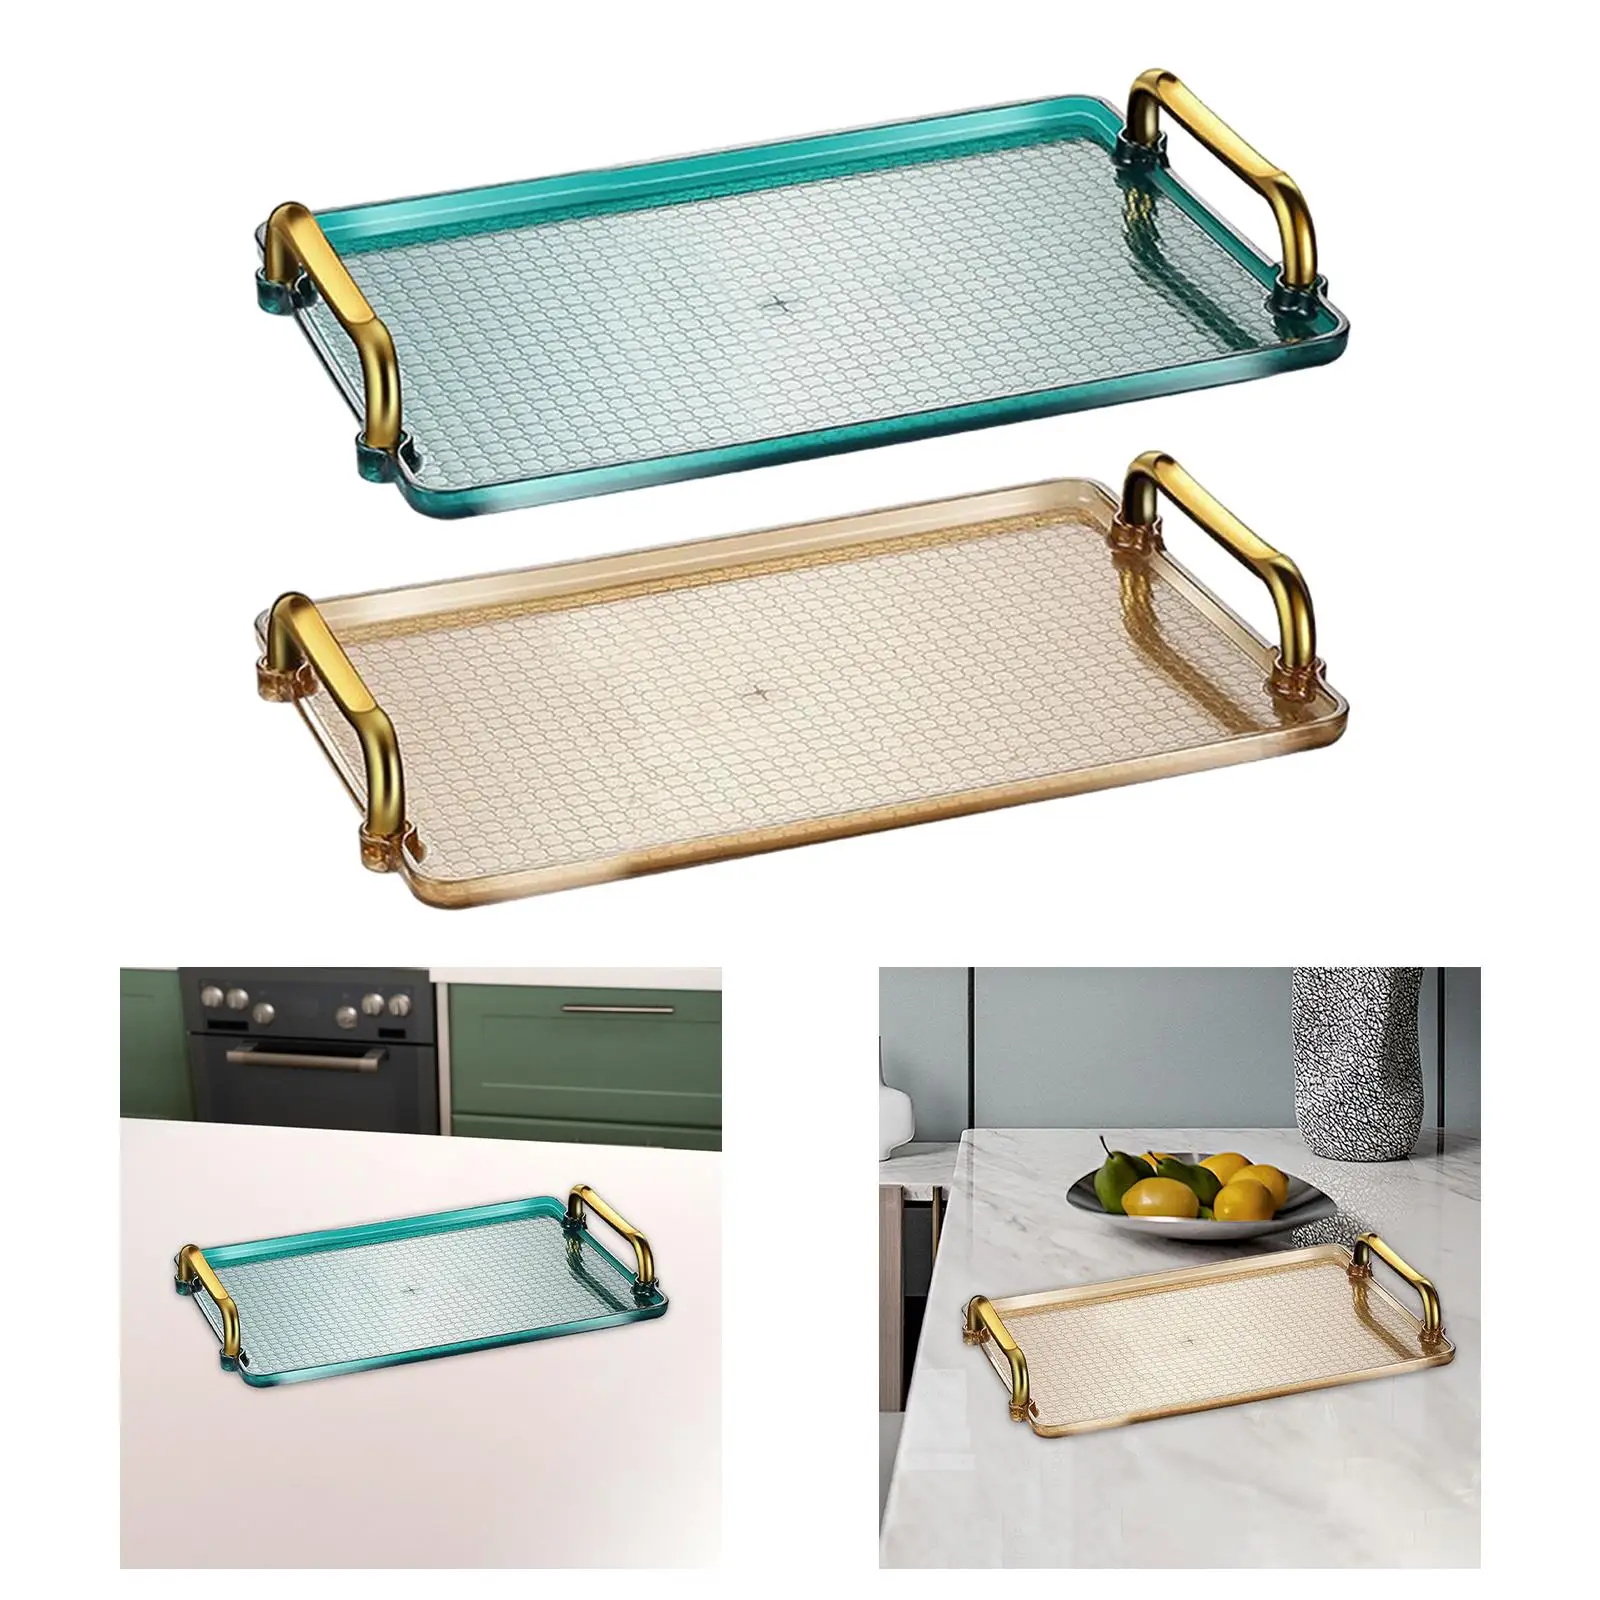 Serving Tray Platter Easy to Clean Versatile for Bar, Kitchen, Dining Room Convenient Table Organizer Decorative Ottoman Tray